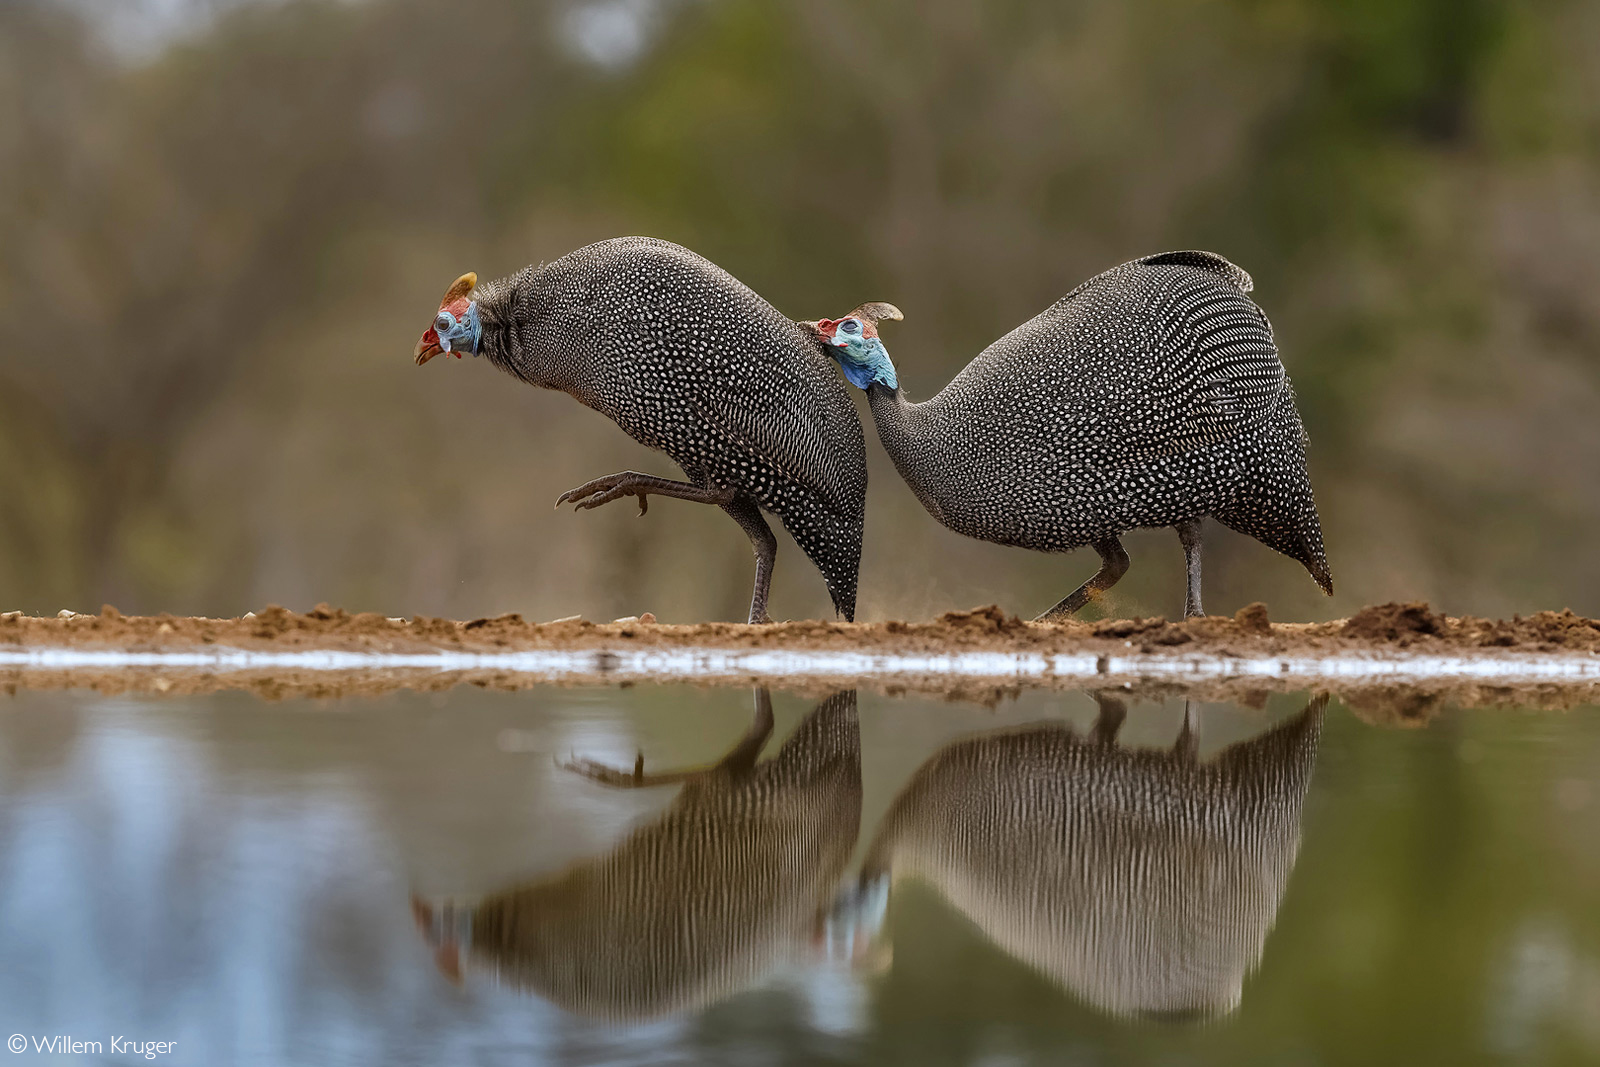 Bickering helmeted guineafowl. Karongwe Private Nature Reserve, South Africa, South Africa © Willem Kruger